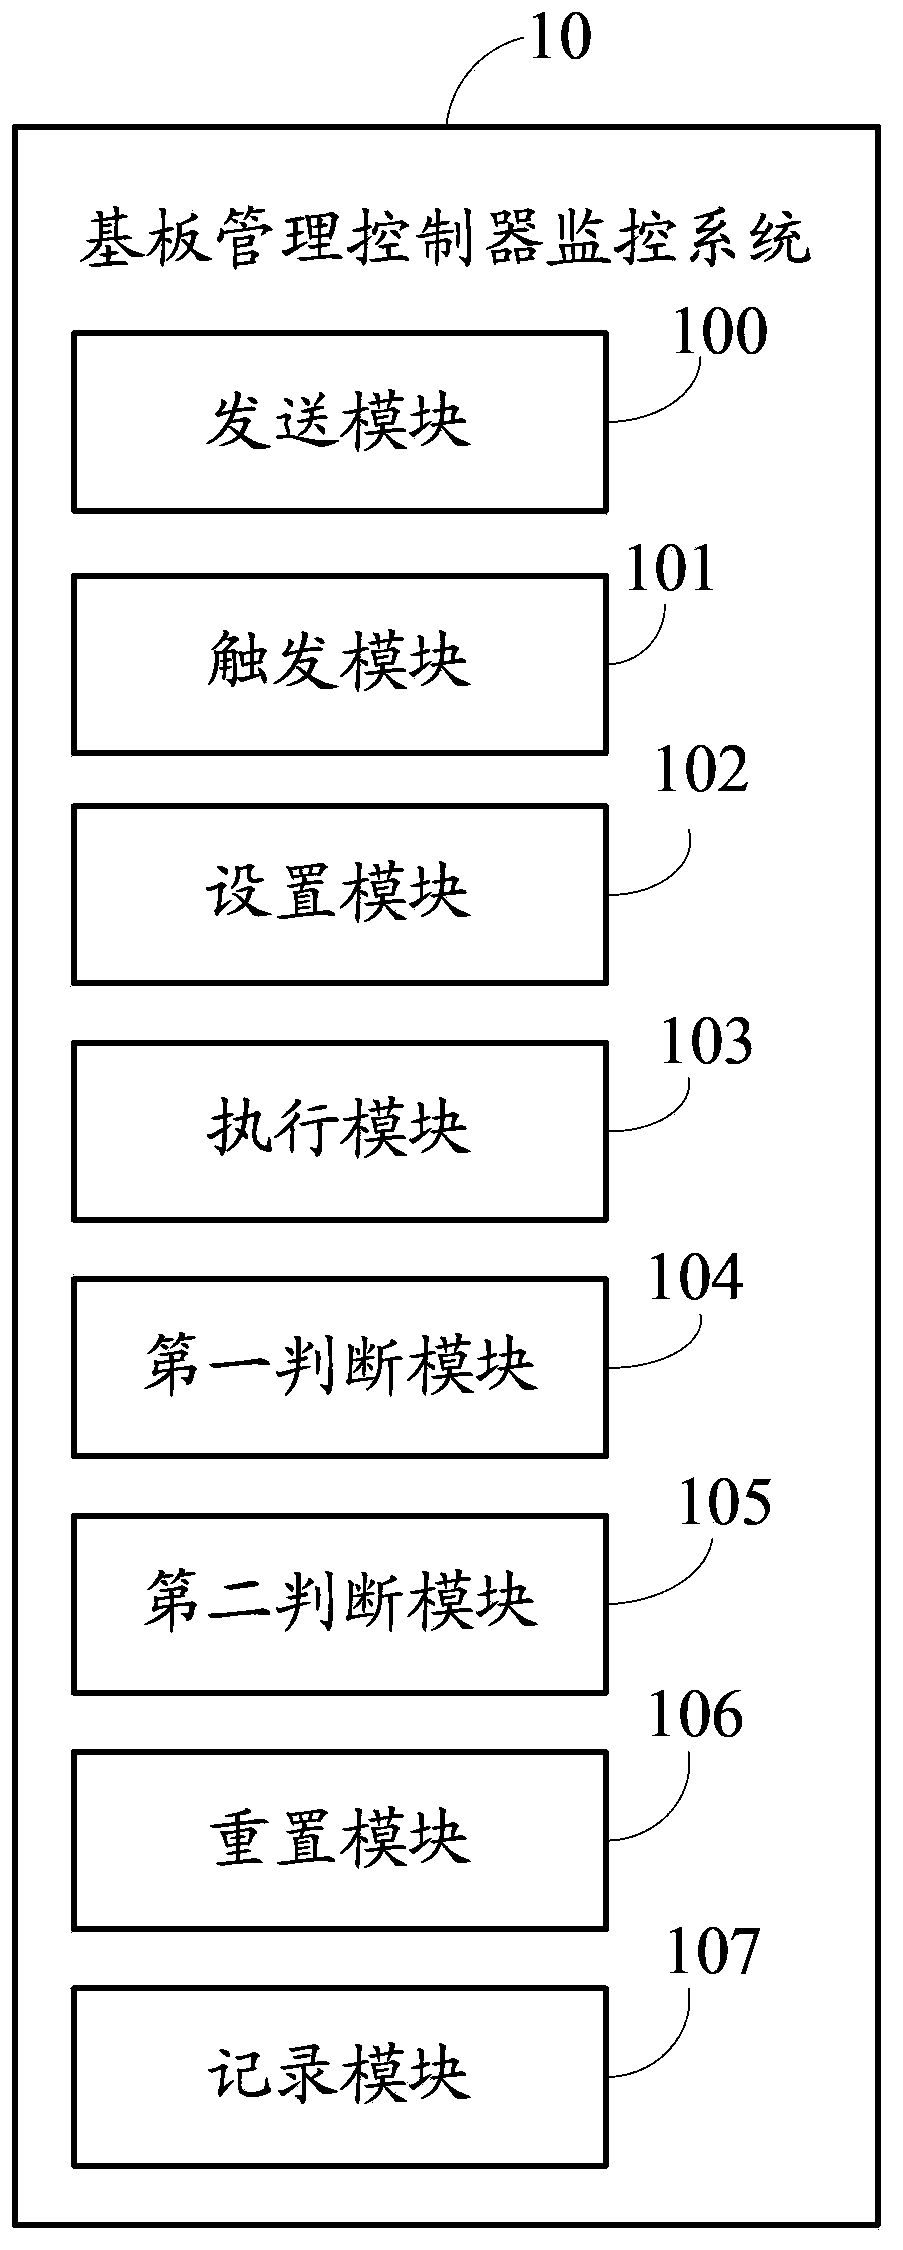 Baseboard management controller monitoring system and method